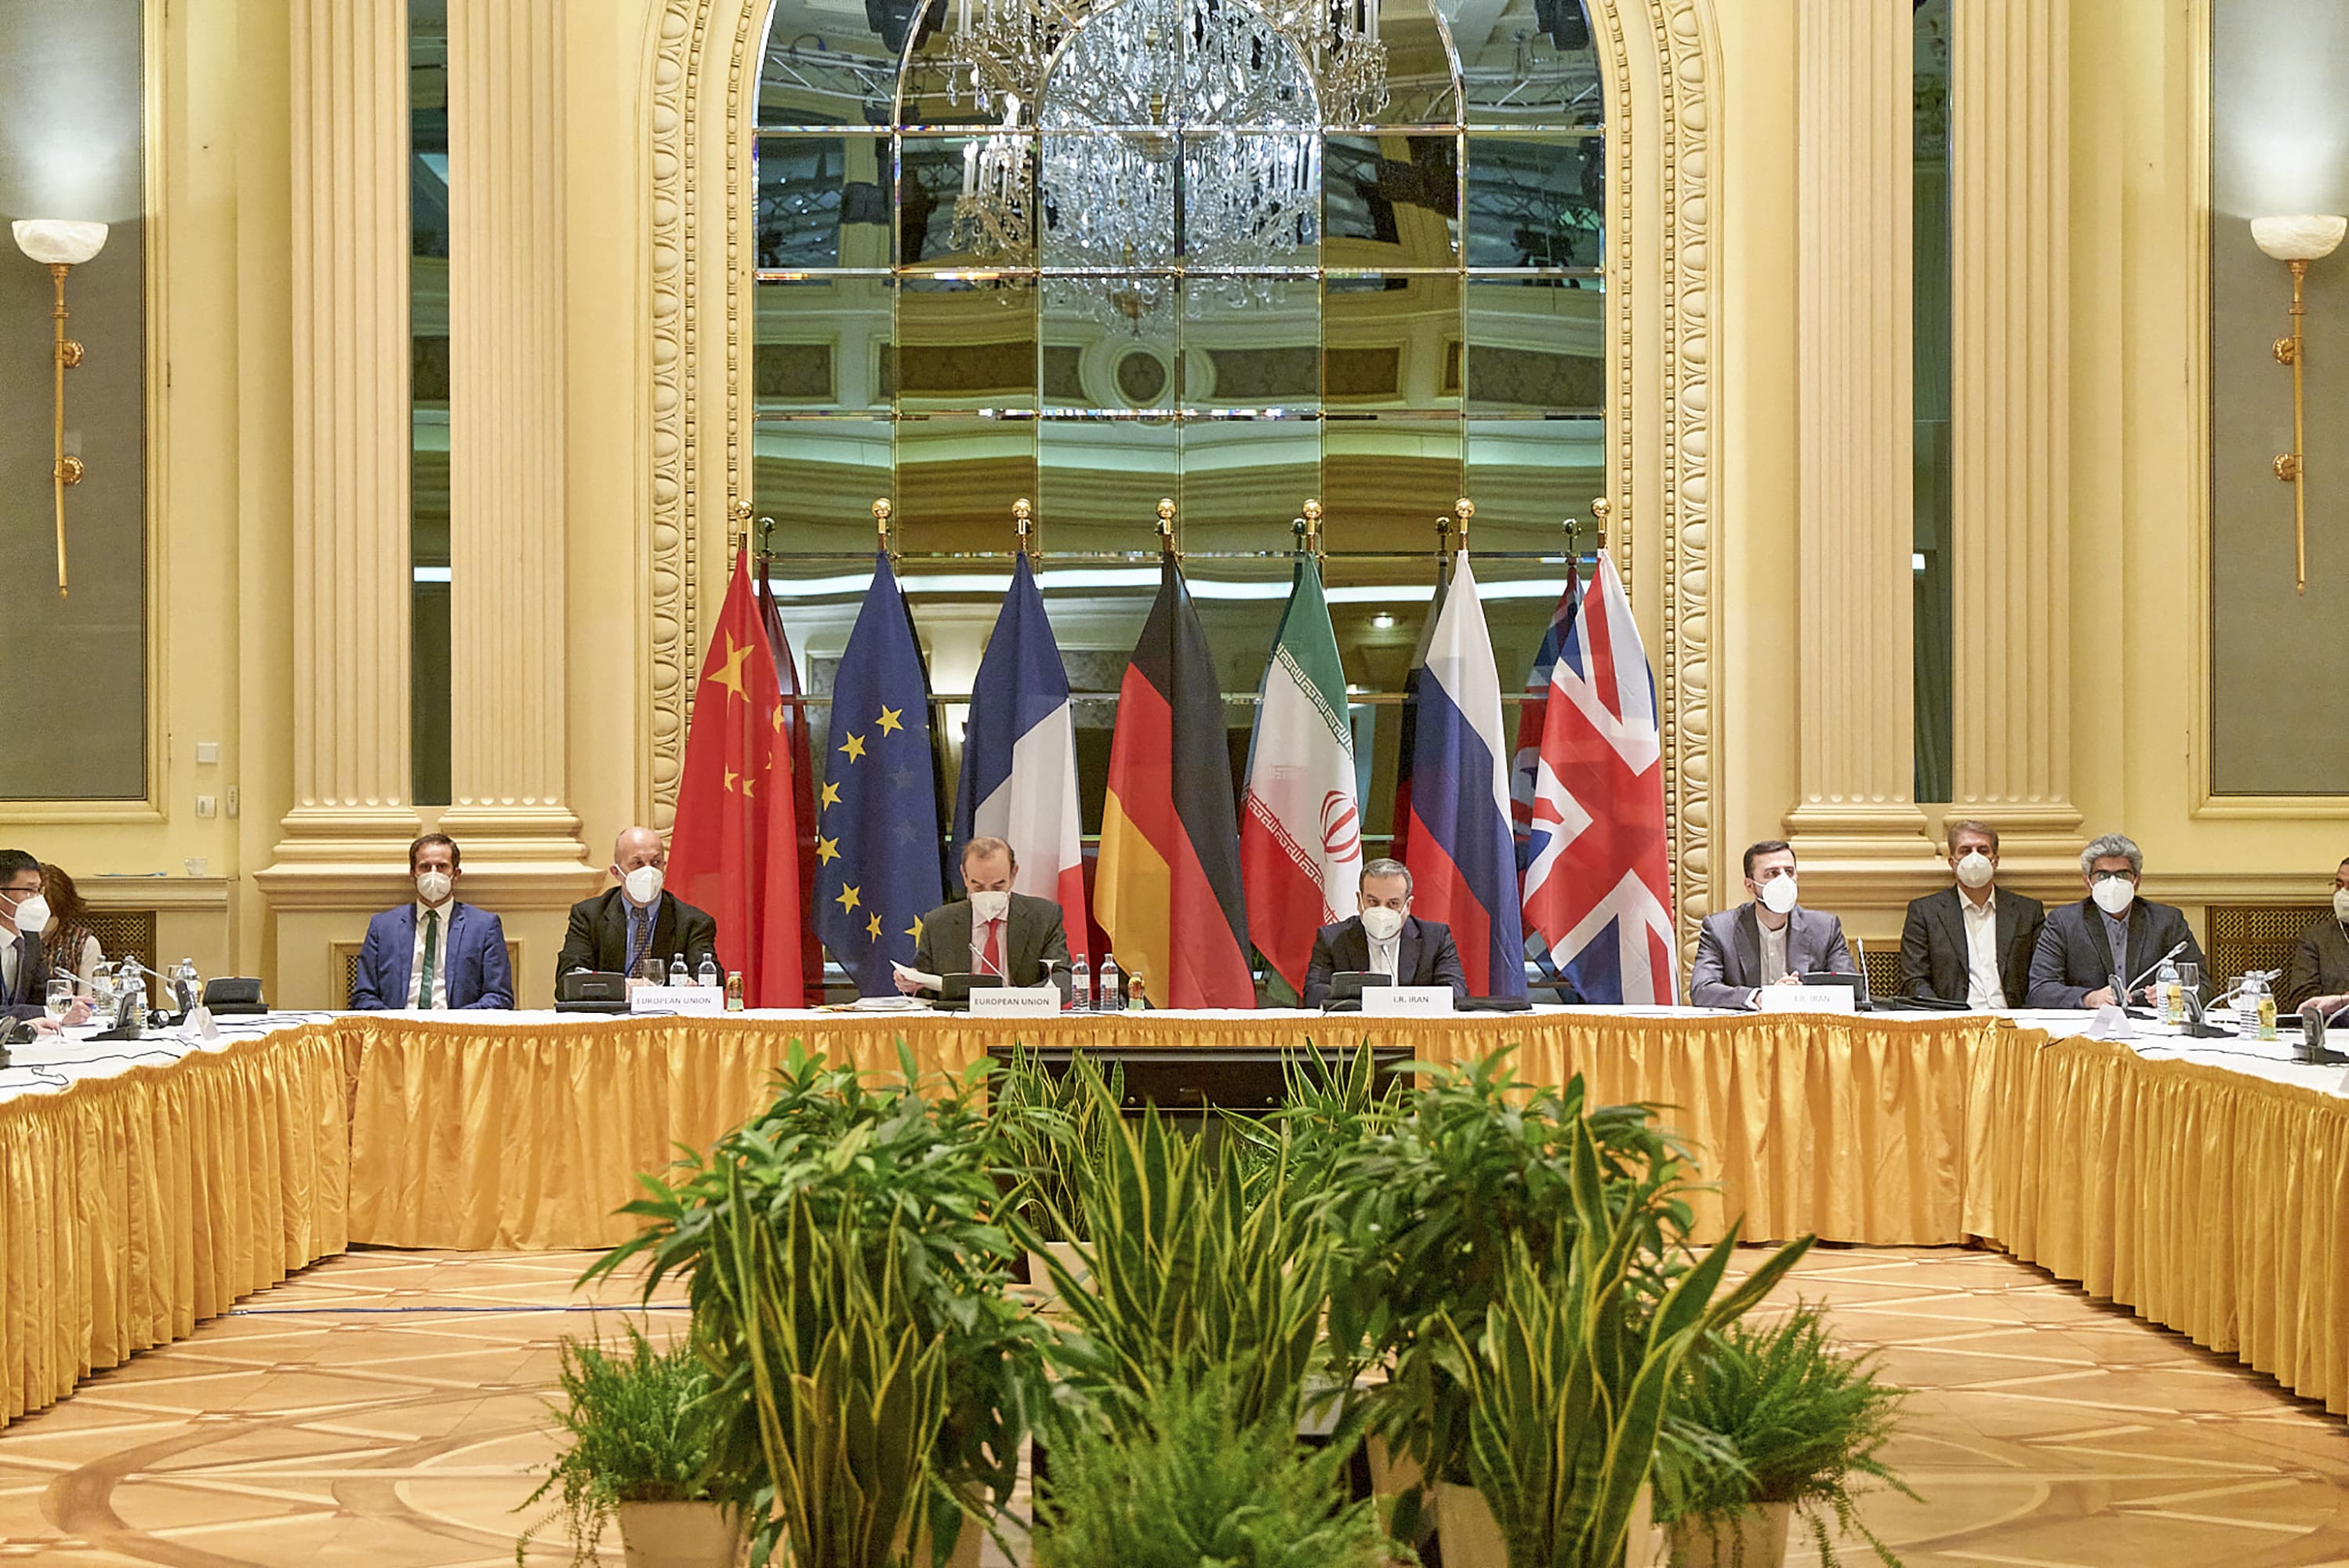 Delegation members from the parties to the Iran nuclear deal meet in Vienna on 20 April 2021 (Handout)